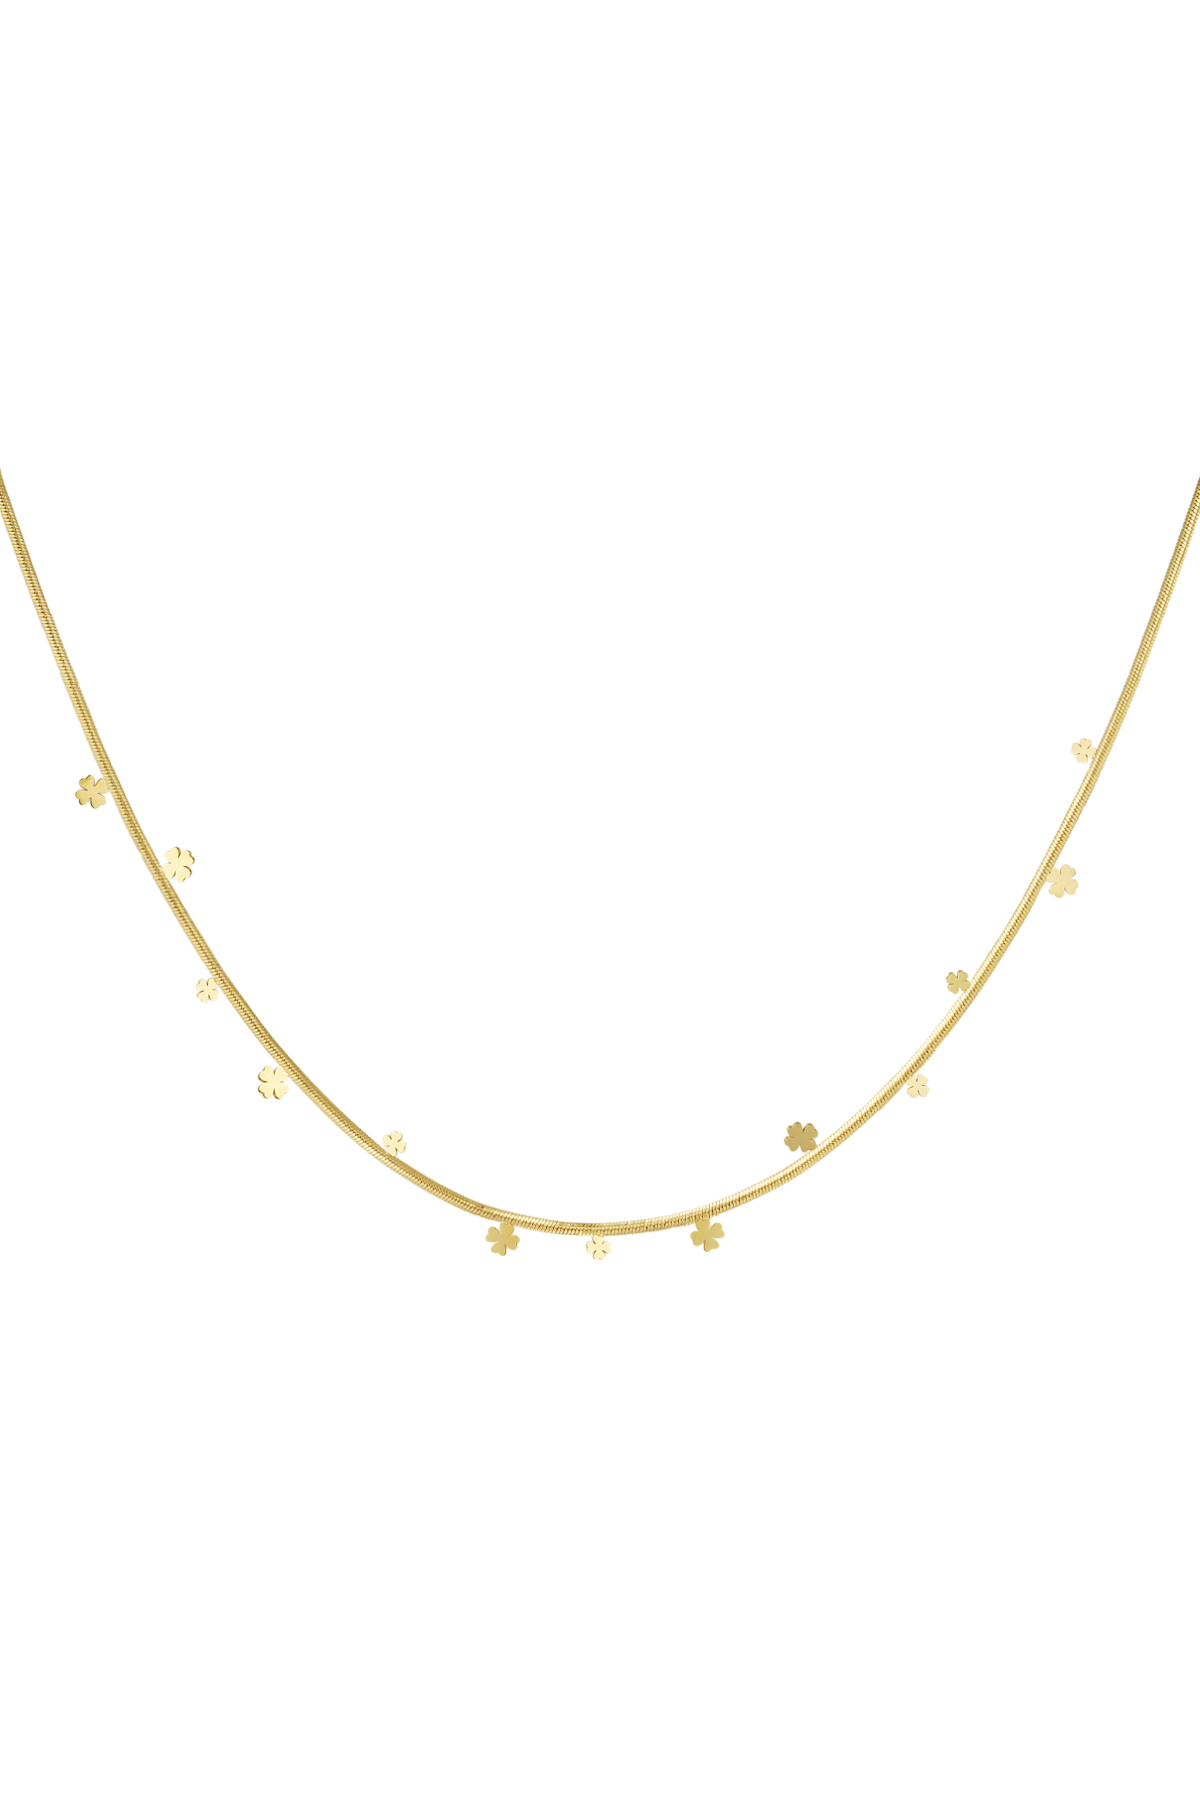 Clover party necklace - gold